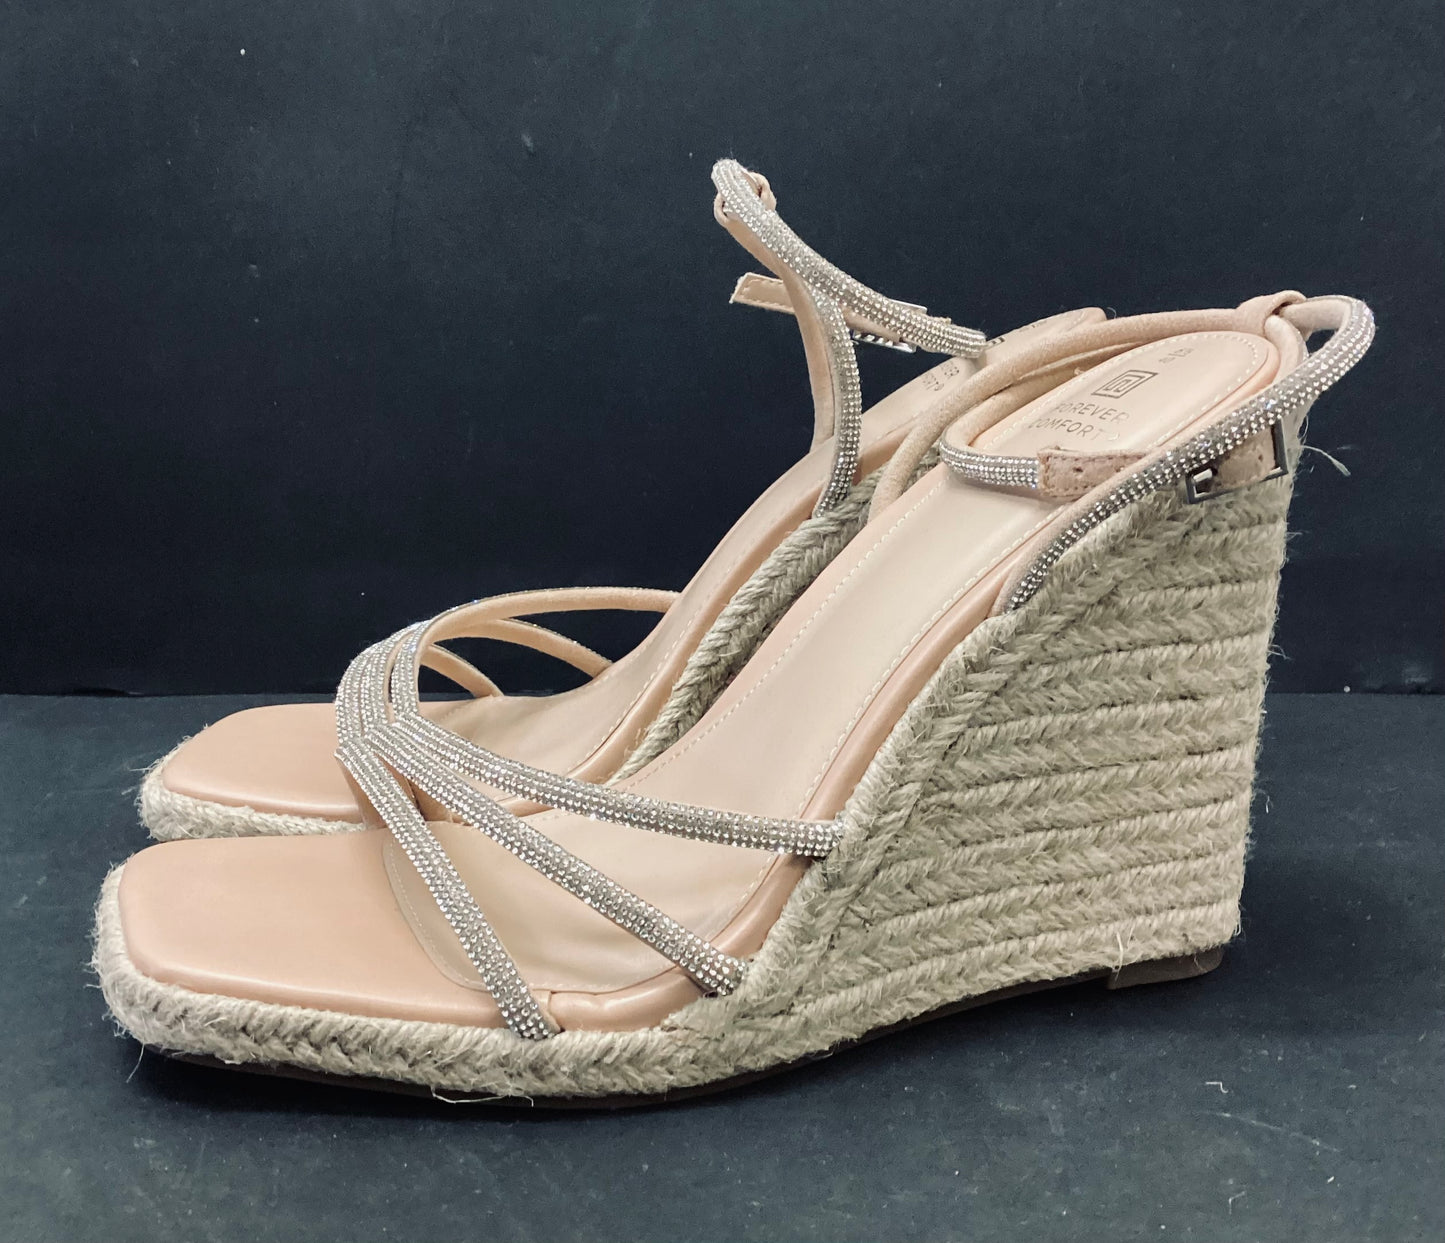 BNWT Next Forever Comfort Wedge Sandals size 6.5